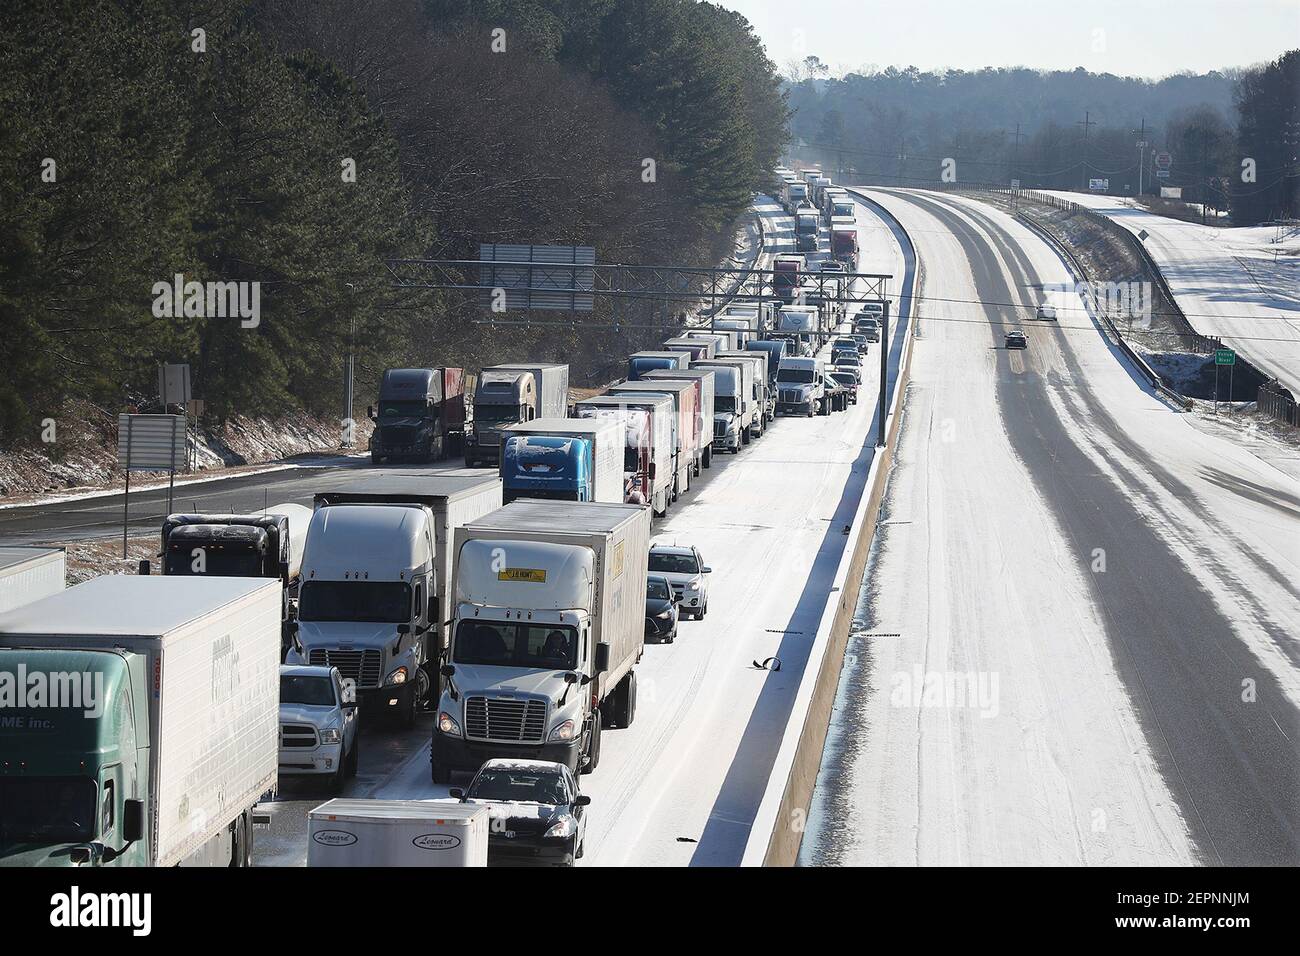 Tractor trailer trucks and motorists are stuck in the ice while all westbound lanes are closed on I-20 West at the Almon Road exit after multiple tractor trailer trucks jackknifed in the winter conditions on Wednesday, January 17, 2018, in Covington, Ga. (Photo by Curtis Compton/Atlanta Journal-Constitution/TNS/Sipa USA) Stock Photo